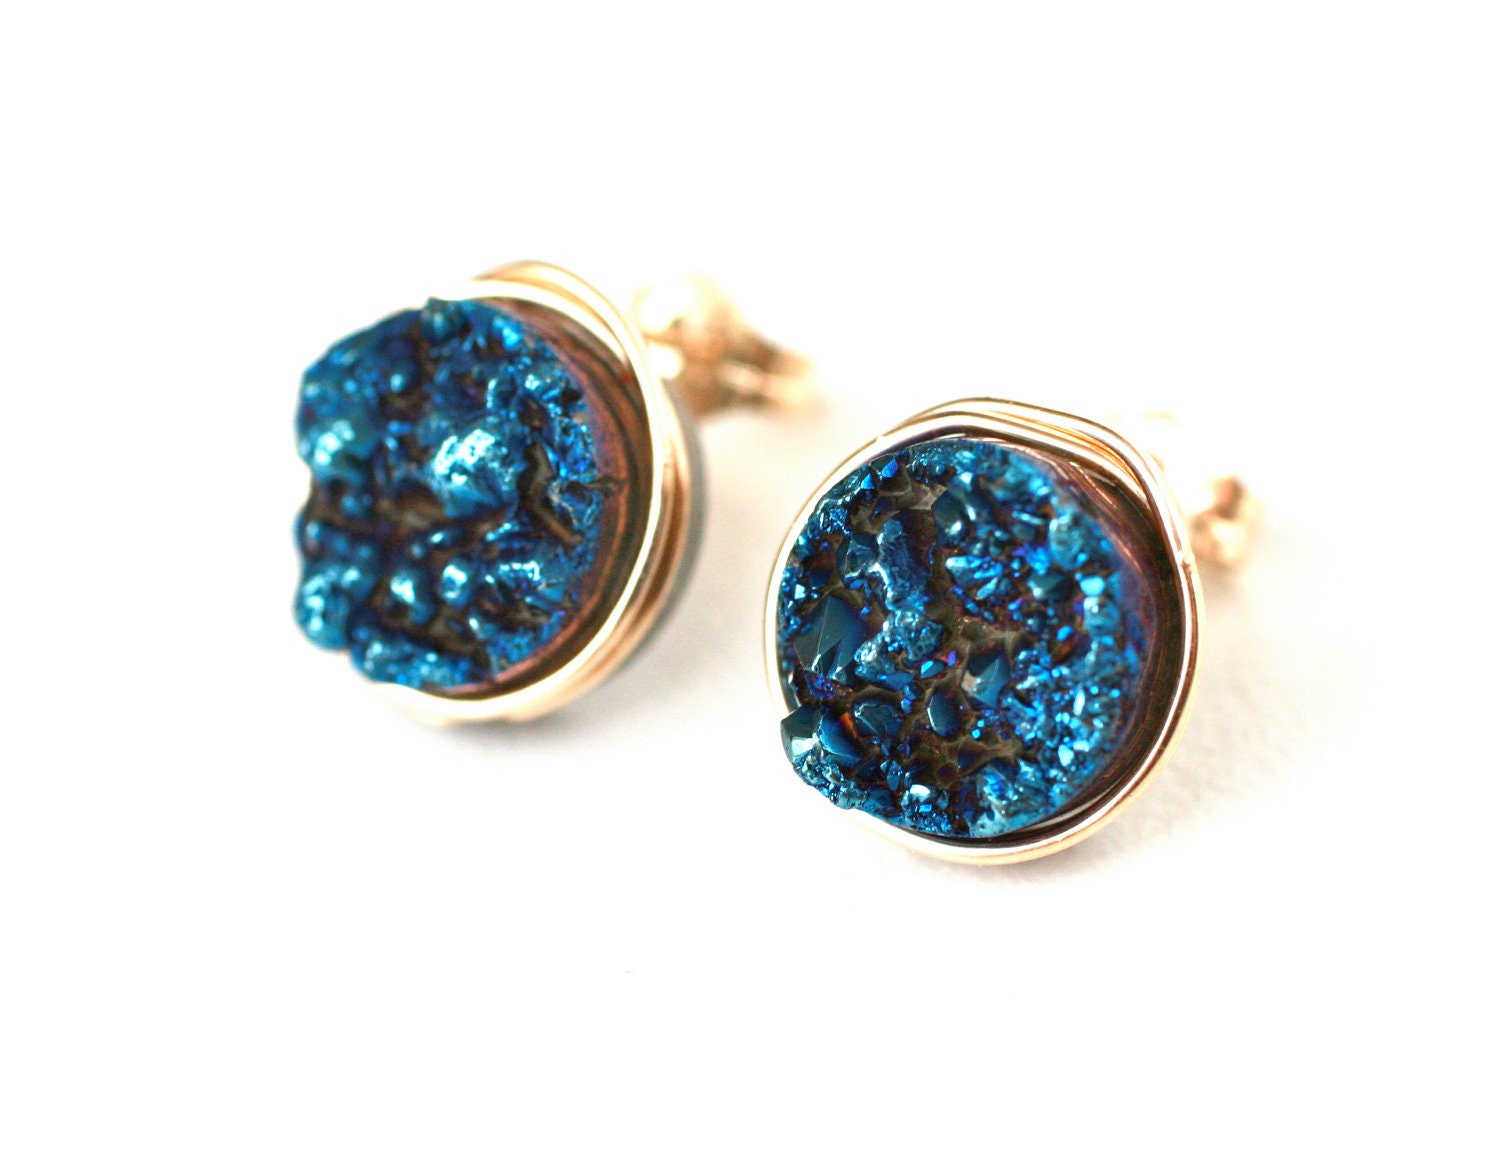 Blue Titanium Druzy Quartz Stud Earrings Wire Wrapped Post 14k Gold Filled - Gift for Her, Under 25 dollars